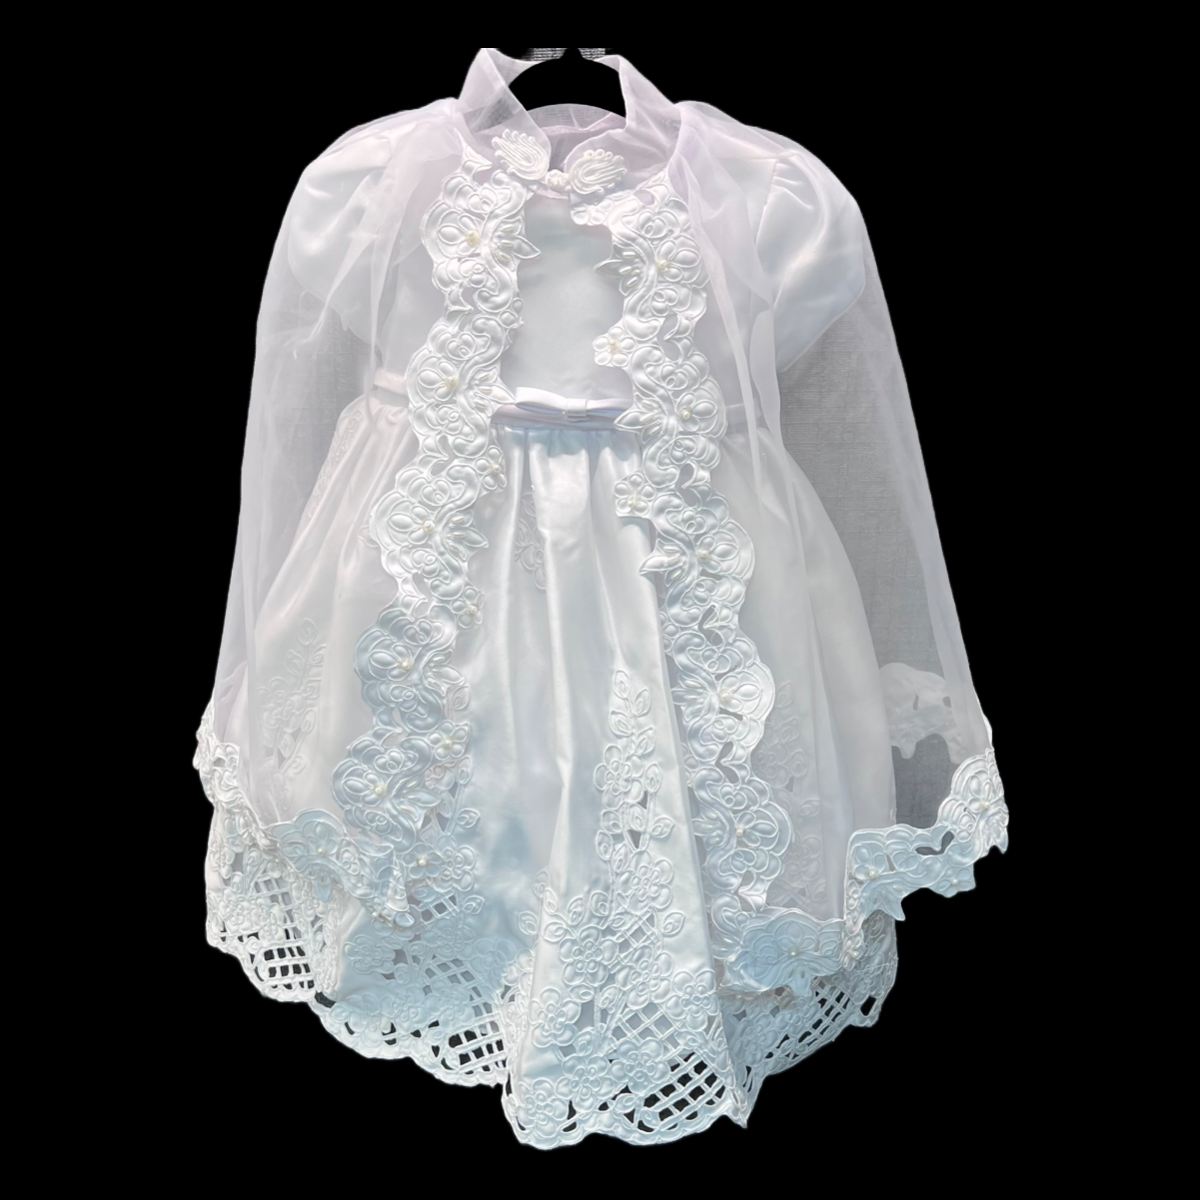 Floral Embroidered Satin Dress Christening Gown